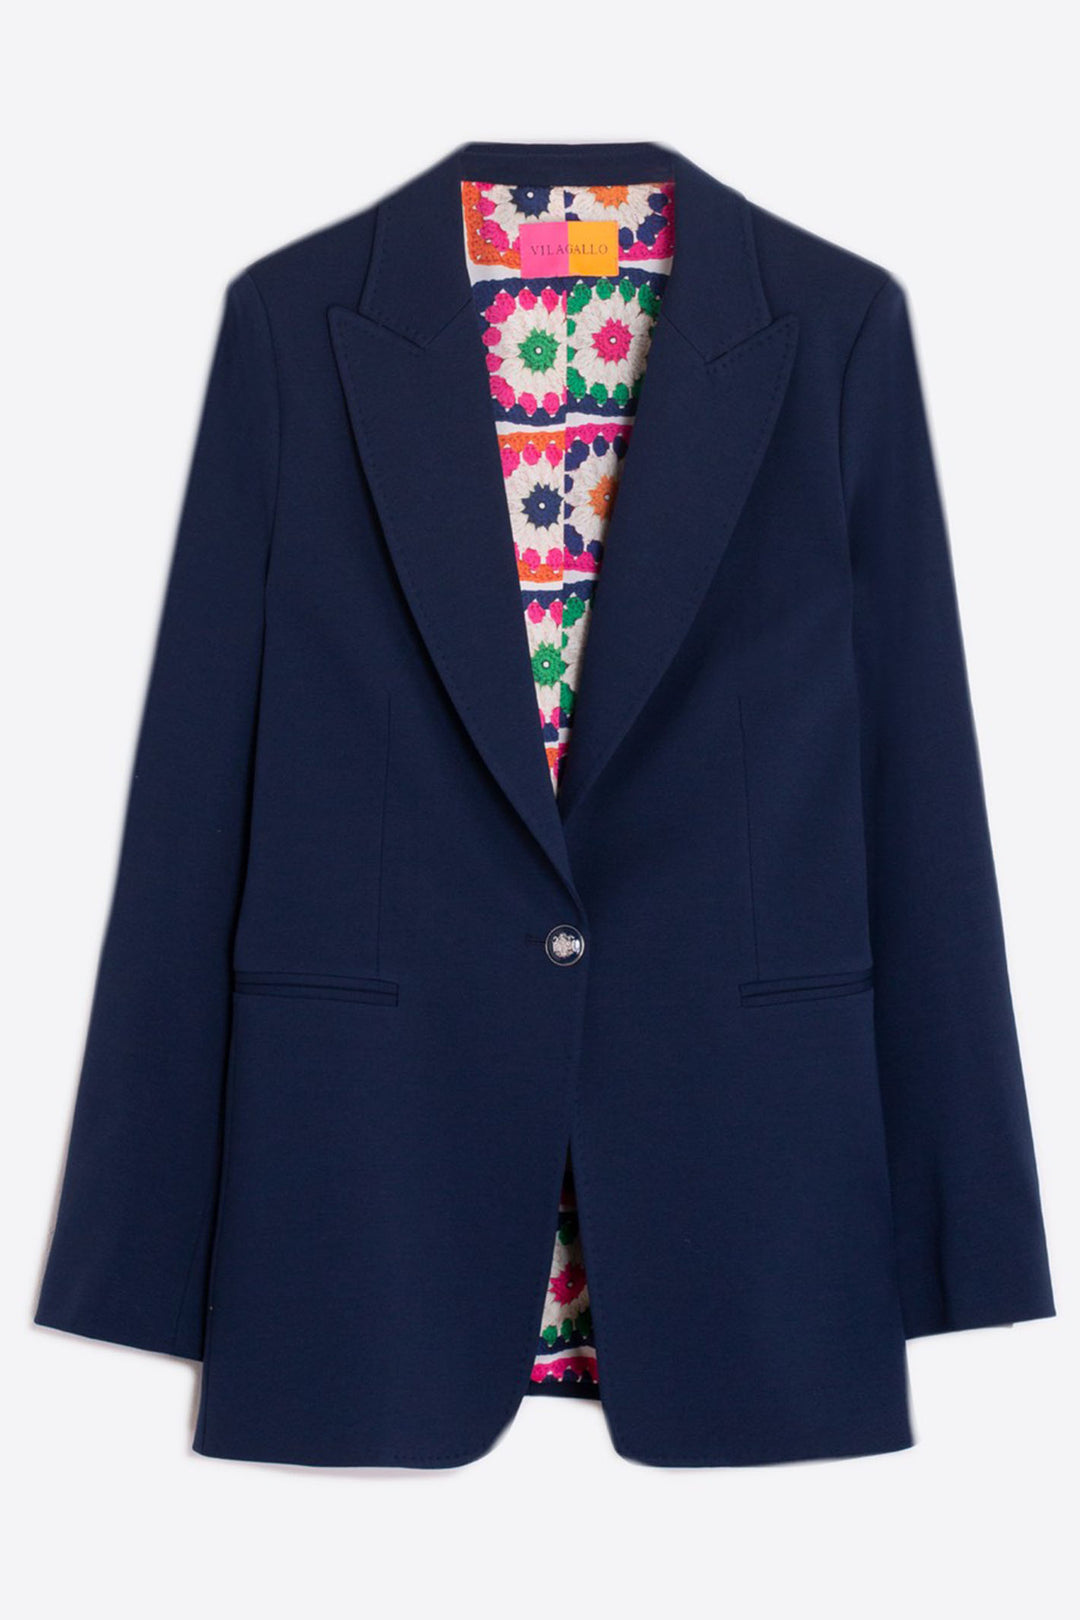 Vilagallo 30991 Navy Knit Perfect Fit Jacket - Shirley Allum Boutique